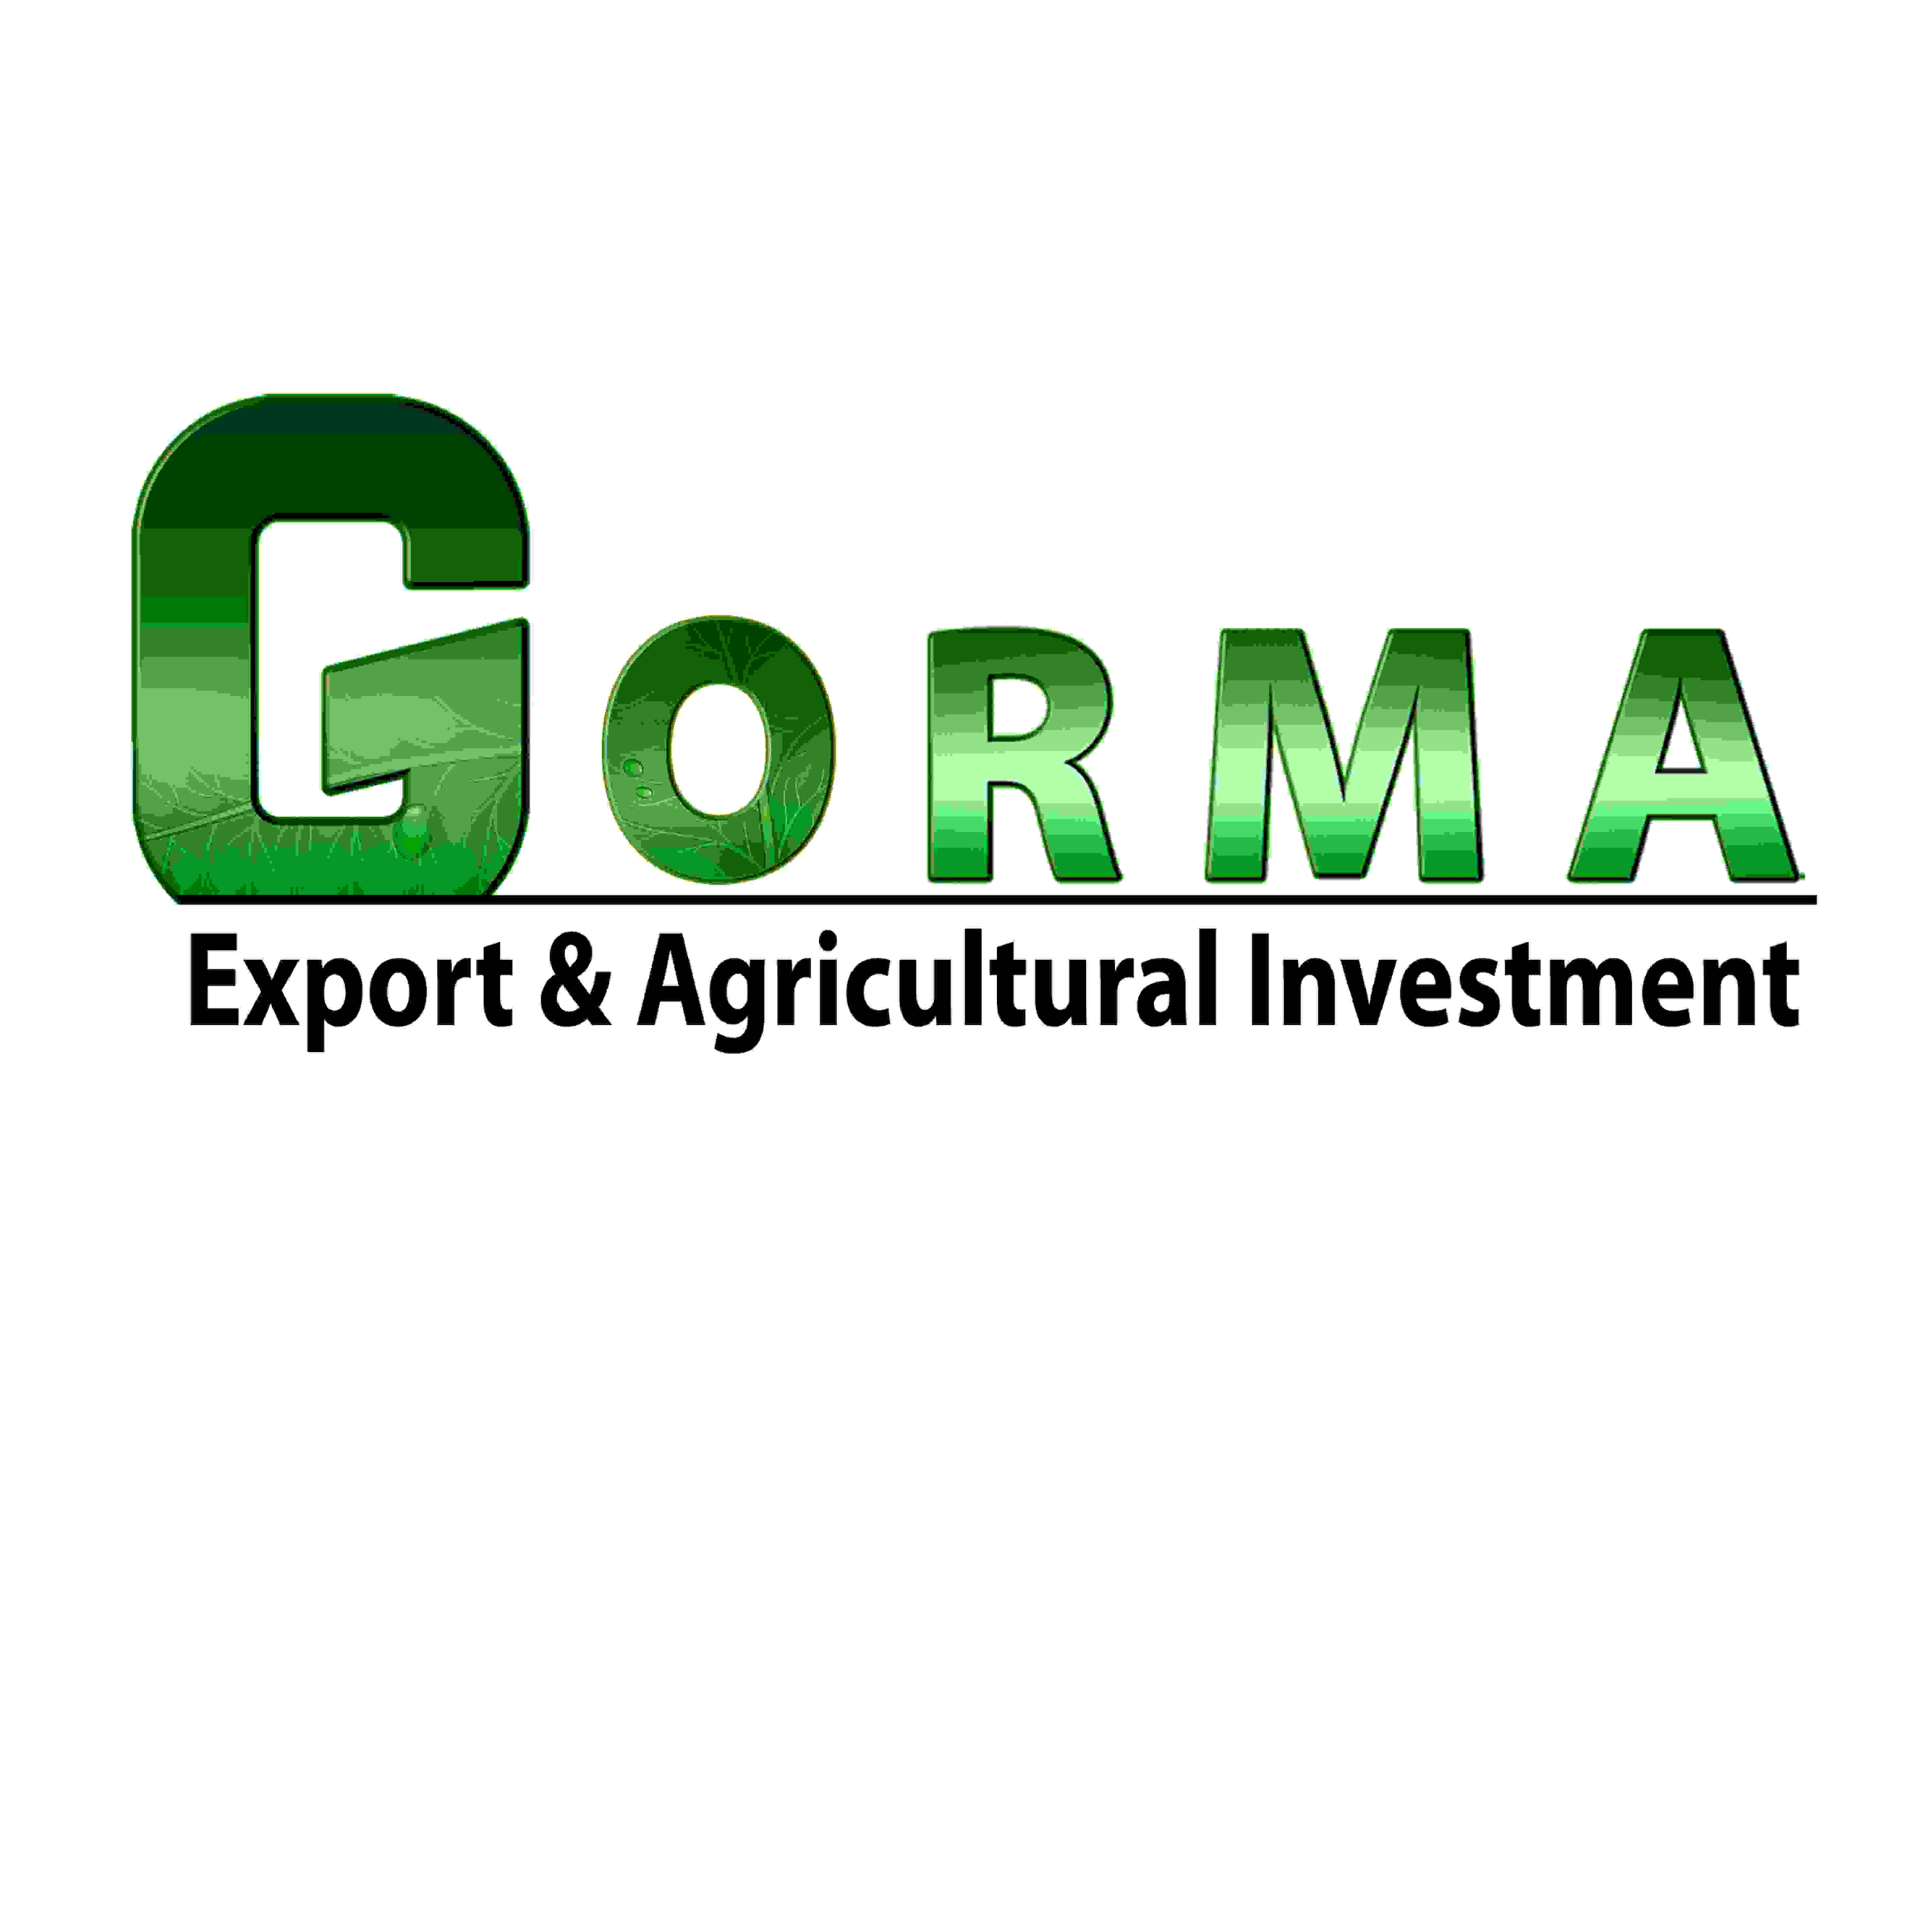 Gorma for export and agricultural investment